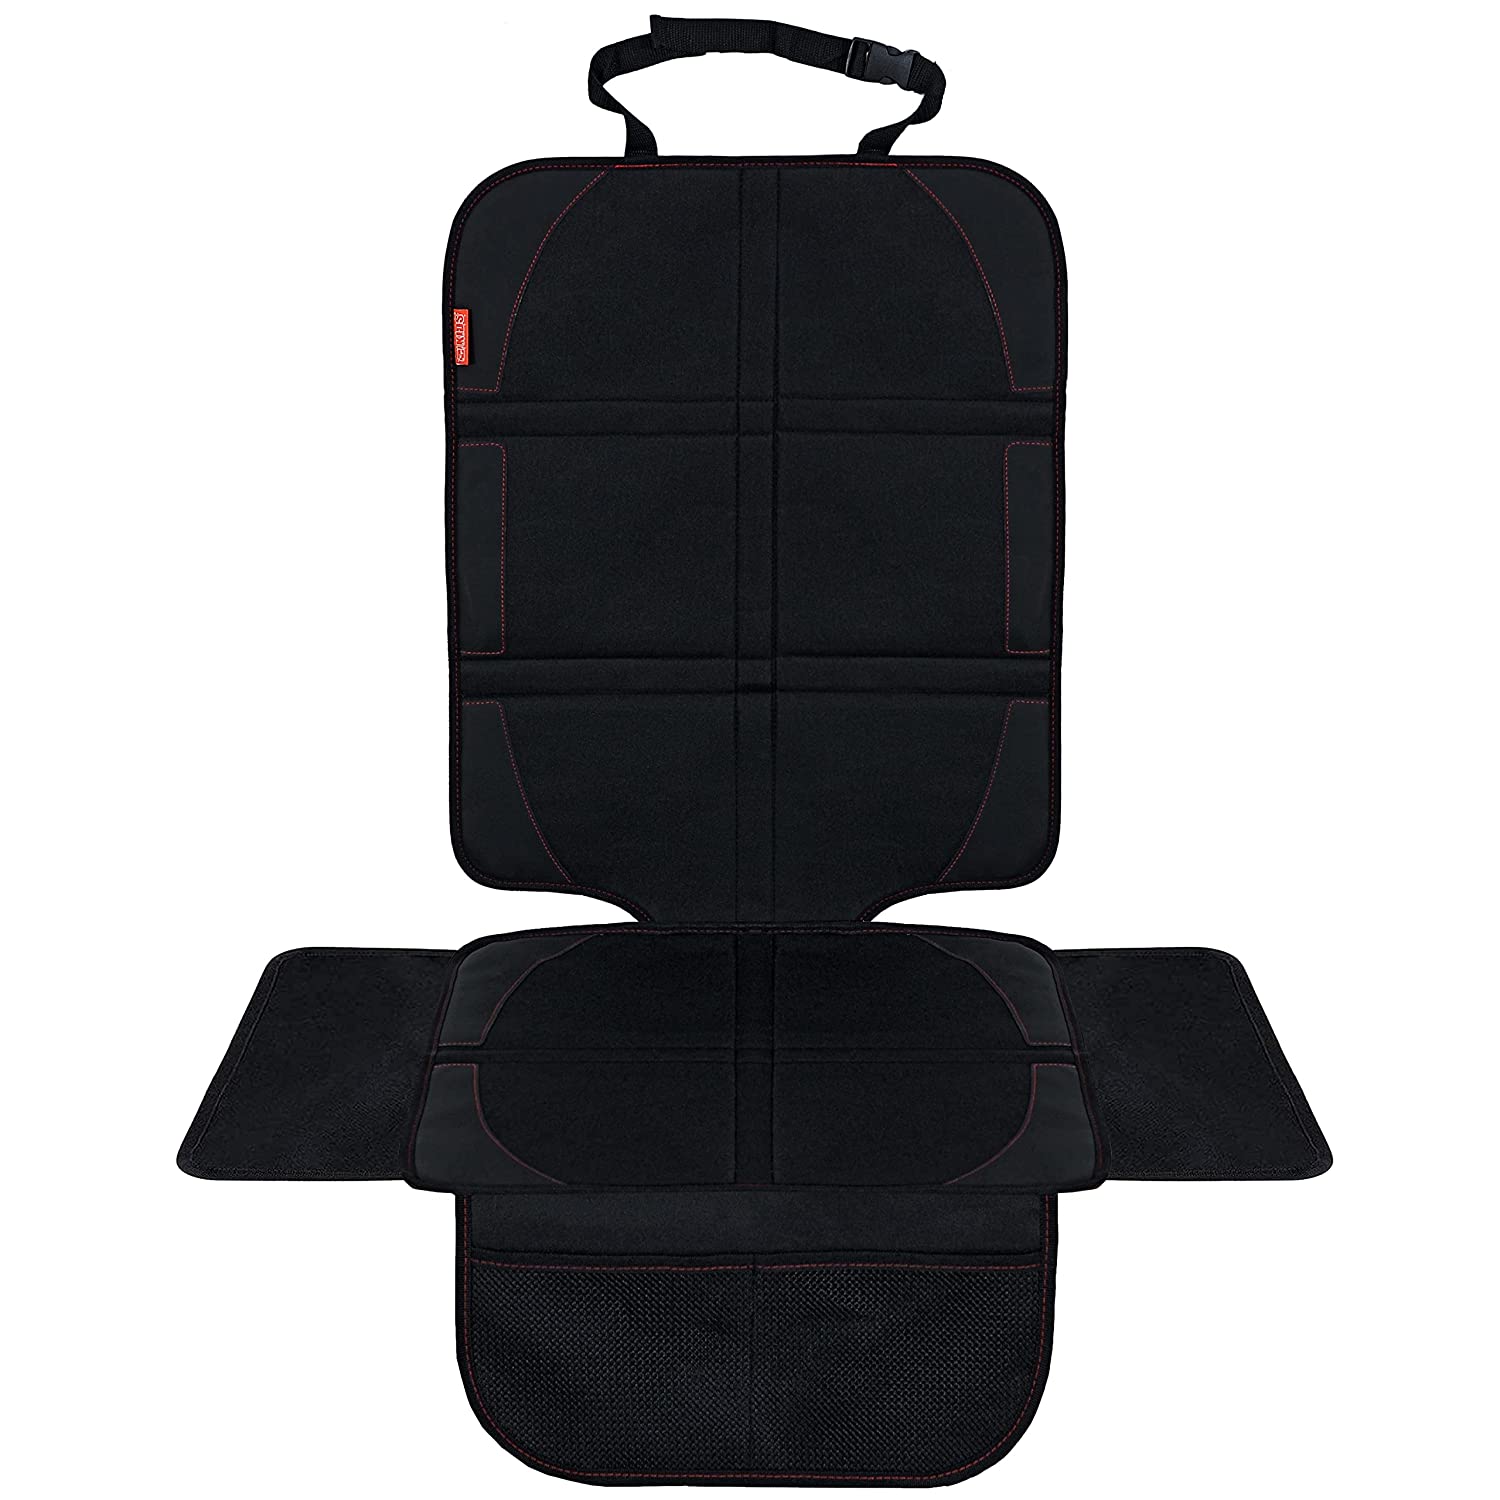 LCP Kids Car seat cover, robust car seat cover, non-slip underlay with Isofix compatibility.